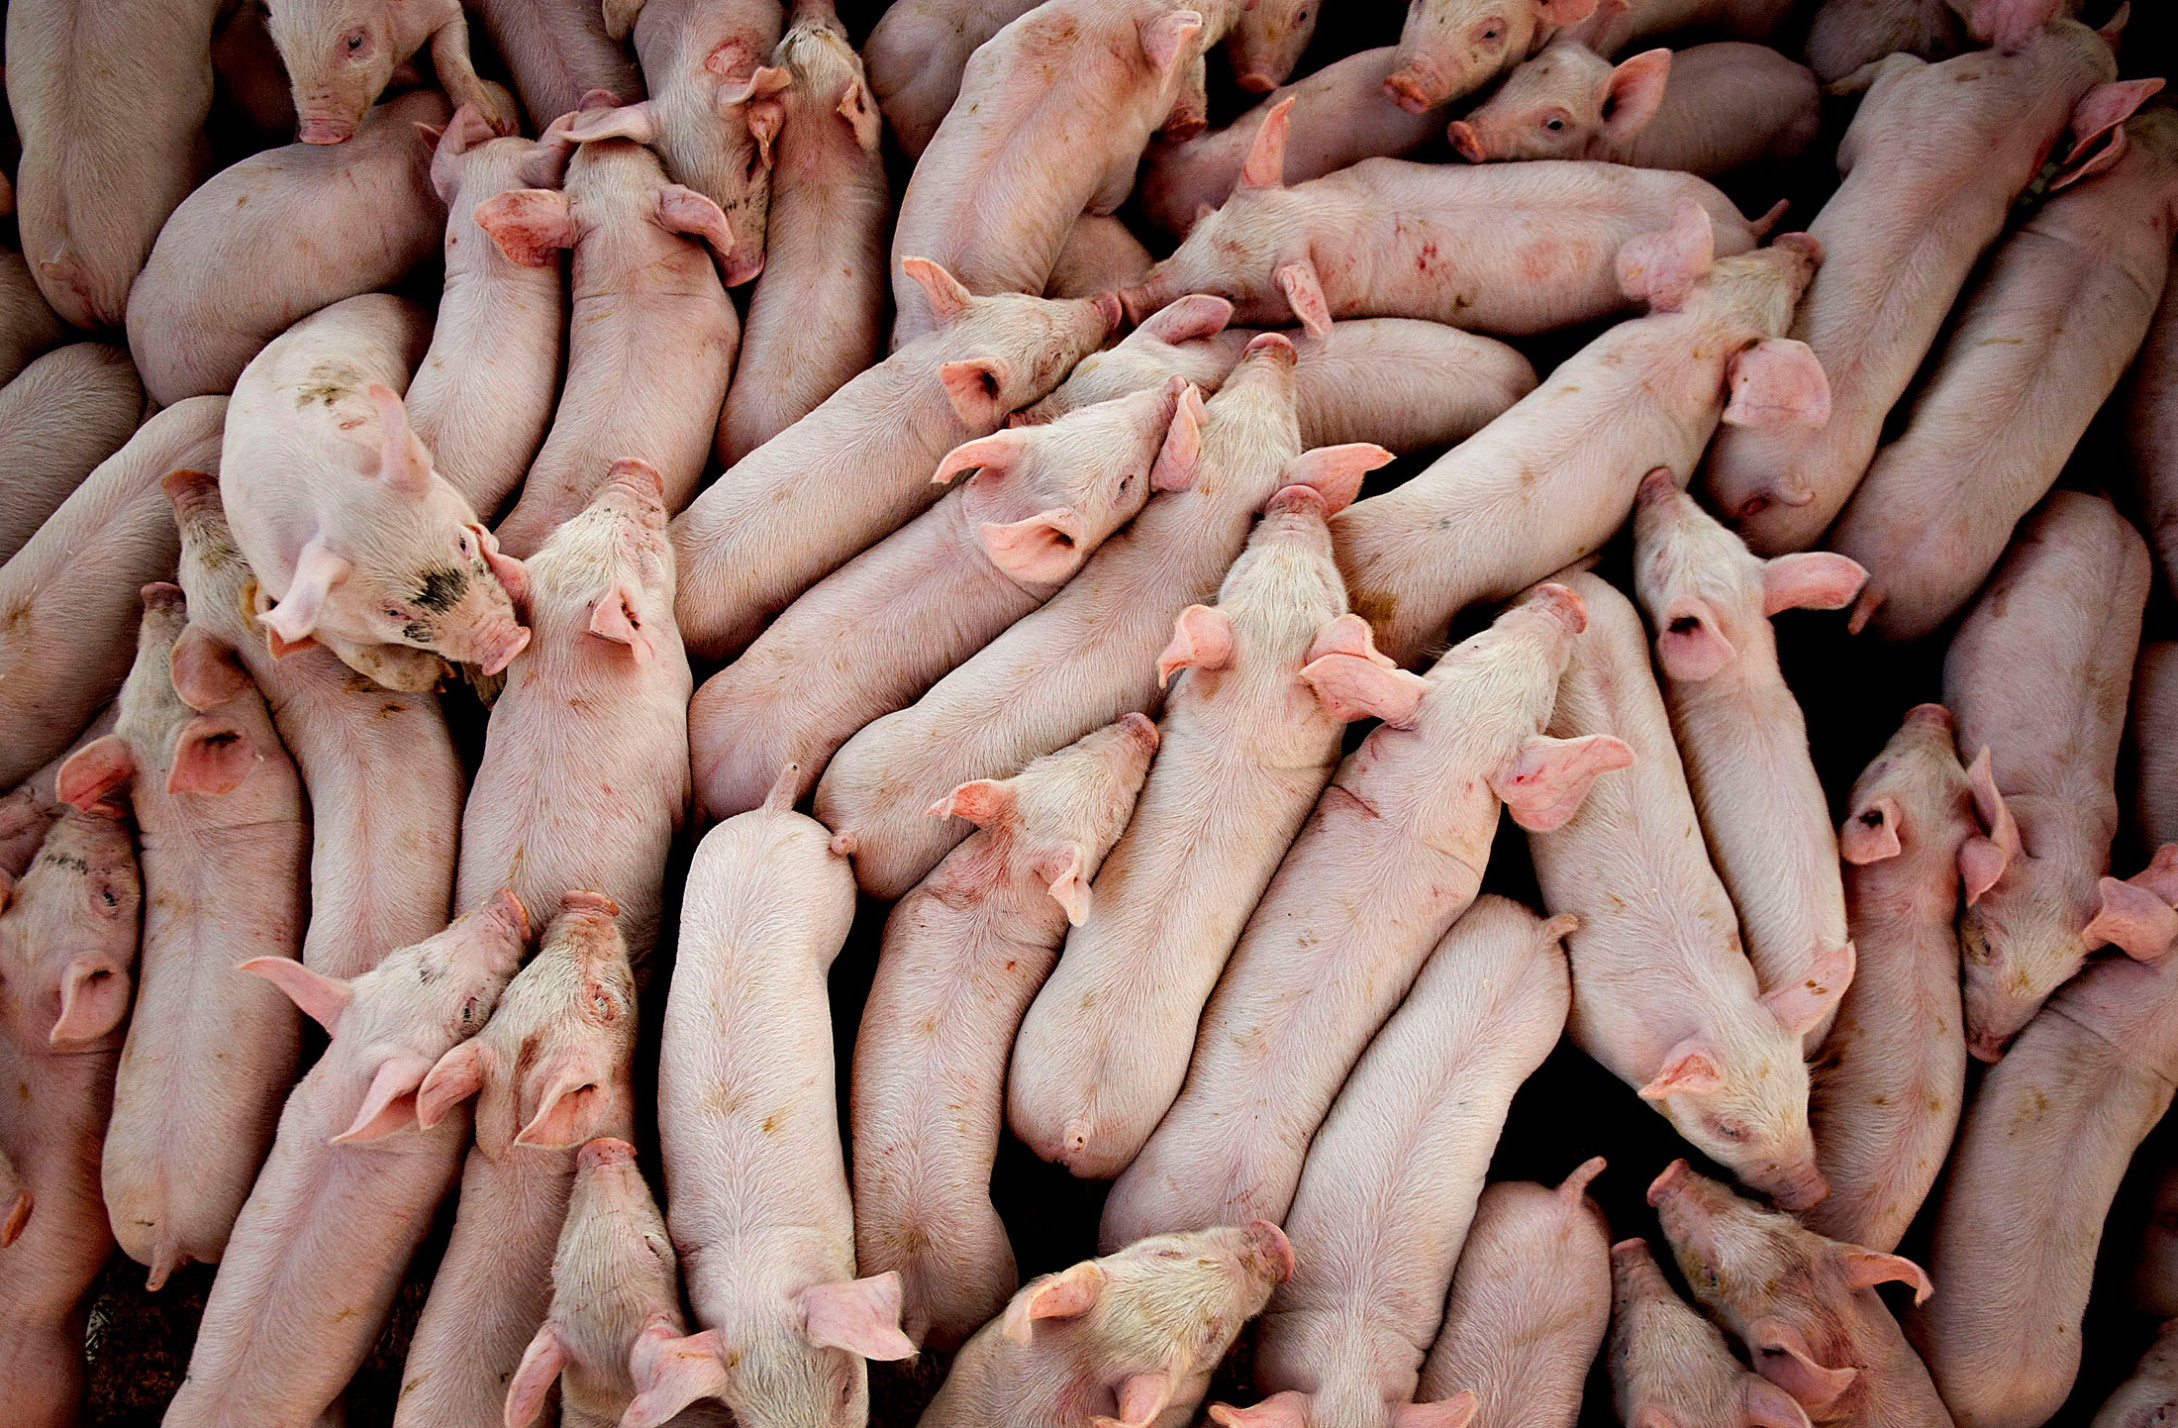 Just How Happy Are the Pigs That End Up at Whole Foods? - Bloomberg